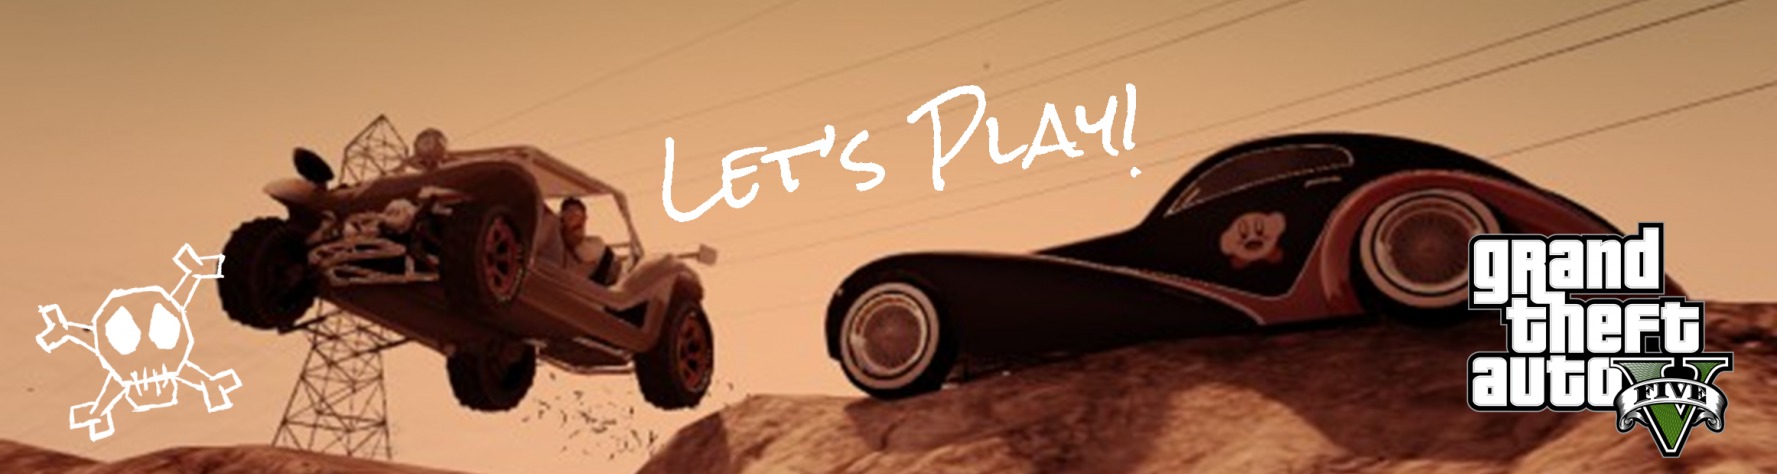 Let’s Play! – GTA V Campaign from the 1st person perspective.